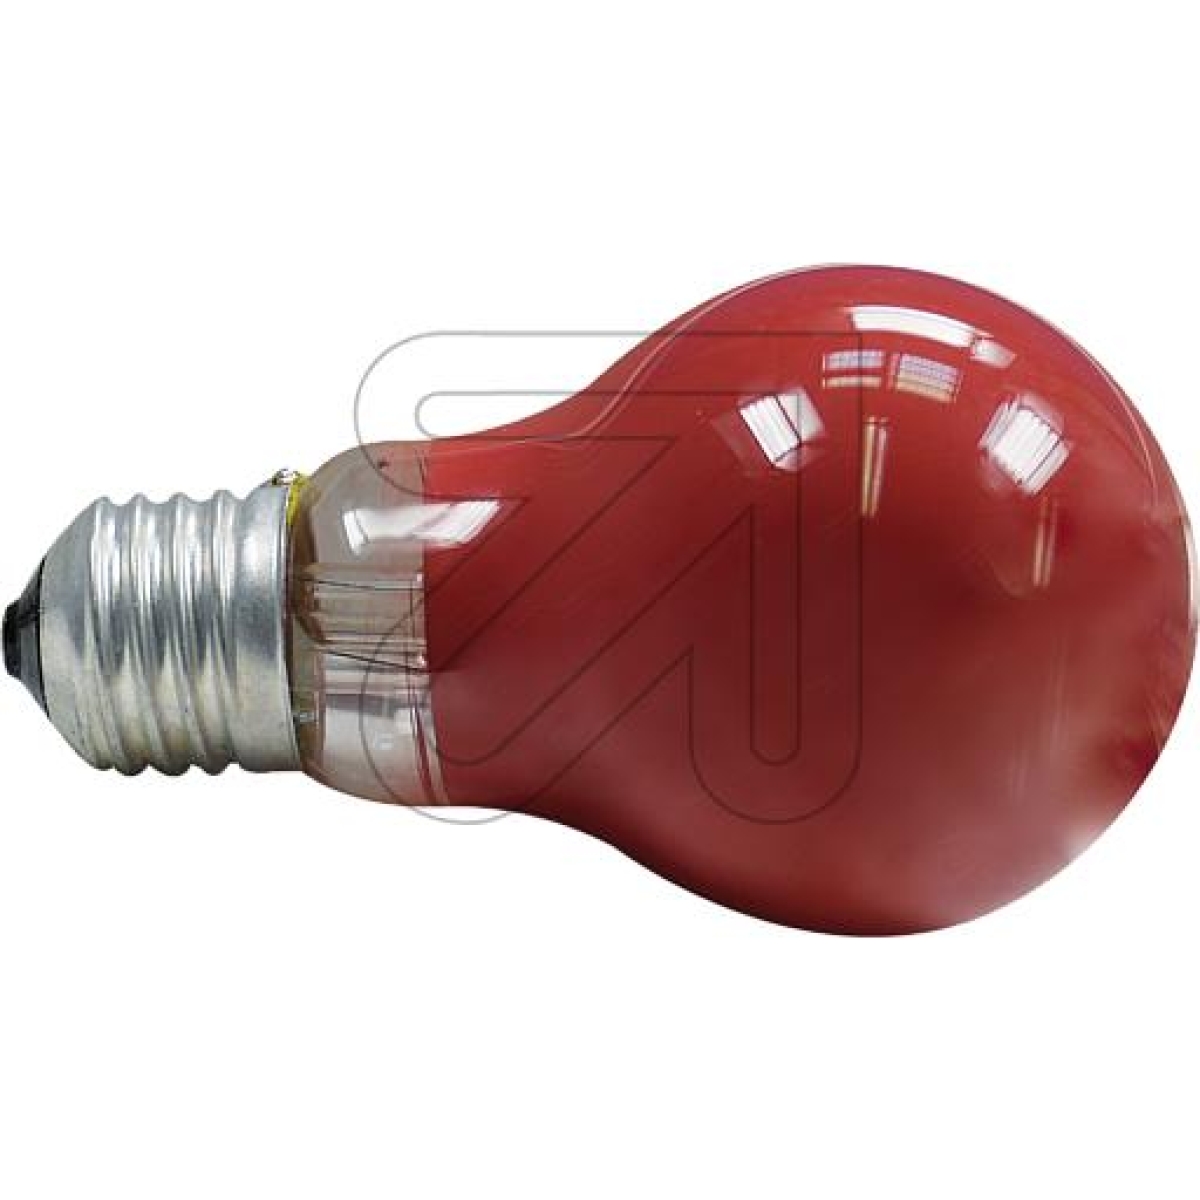 LEDmaxxGeneral service lamp E27 25W red gg106650Article-No: 511800